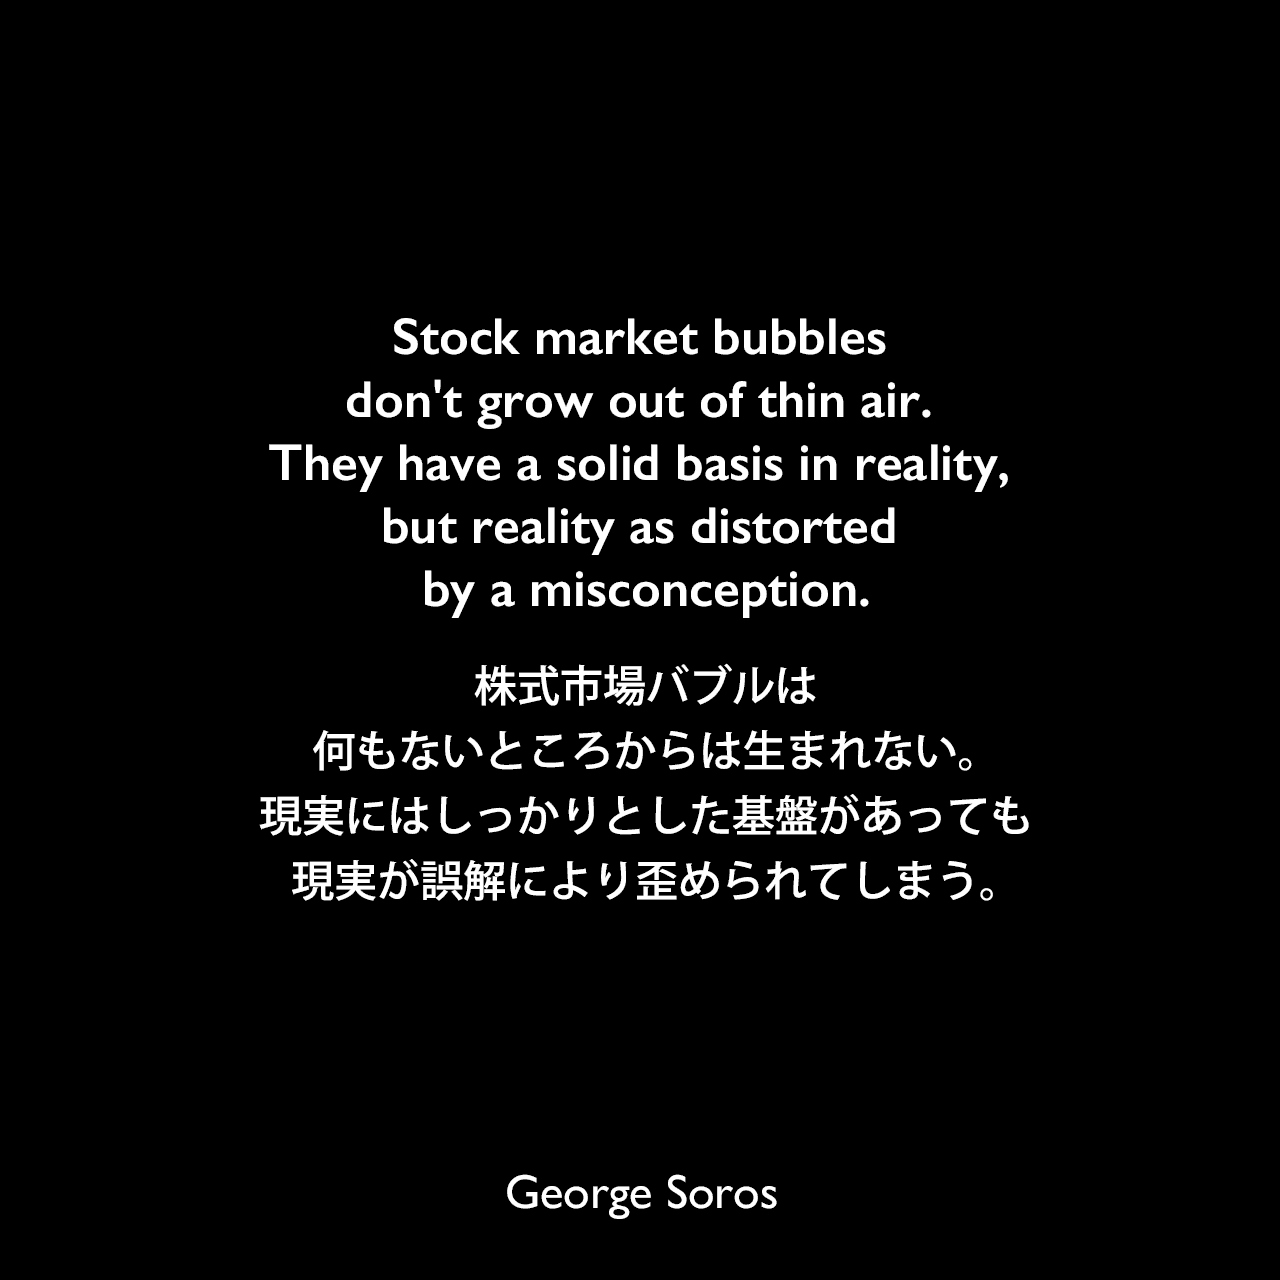 Stock market bubbles don't grow out of thin air. They have a solid basis in reality, but reality as distorted by a misconception.株式市場バブルは何もないところからは生まれない。現実にはしっかりとした基盤があっても、現実が誤解により歪められてしまう。George Soros